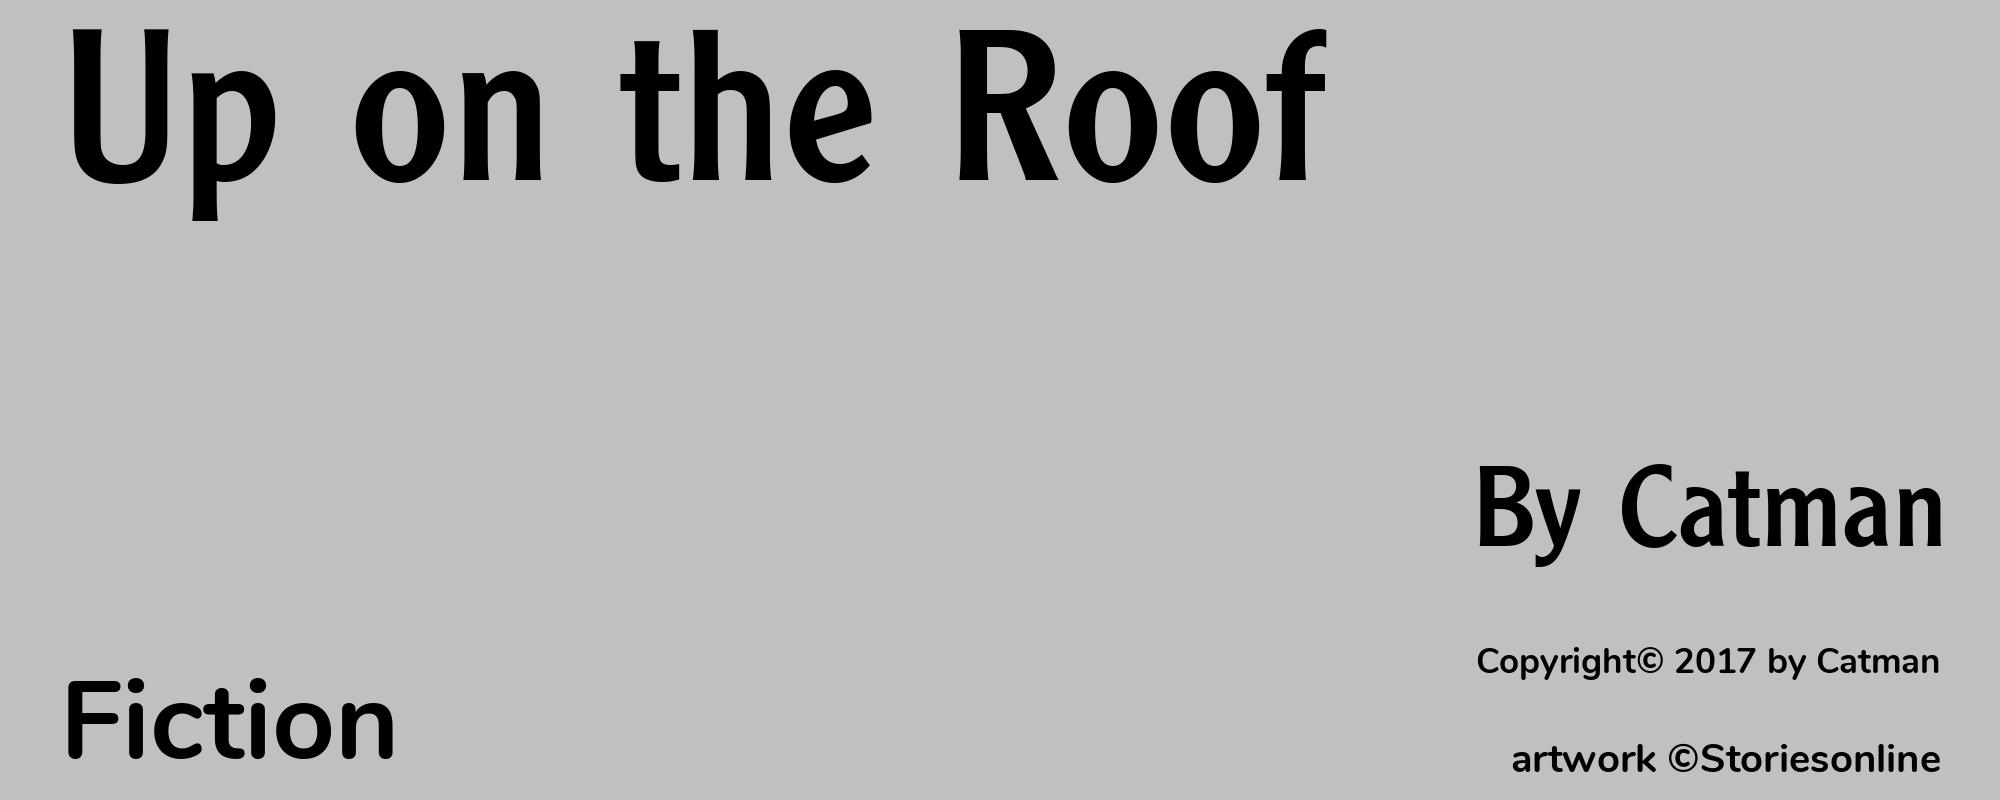 Up on the Roof - Cover